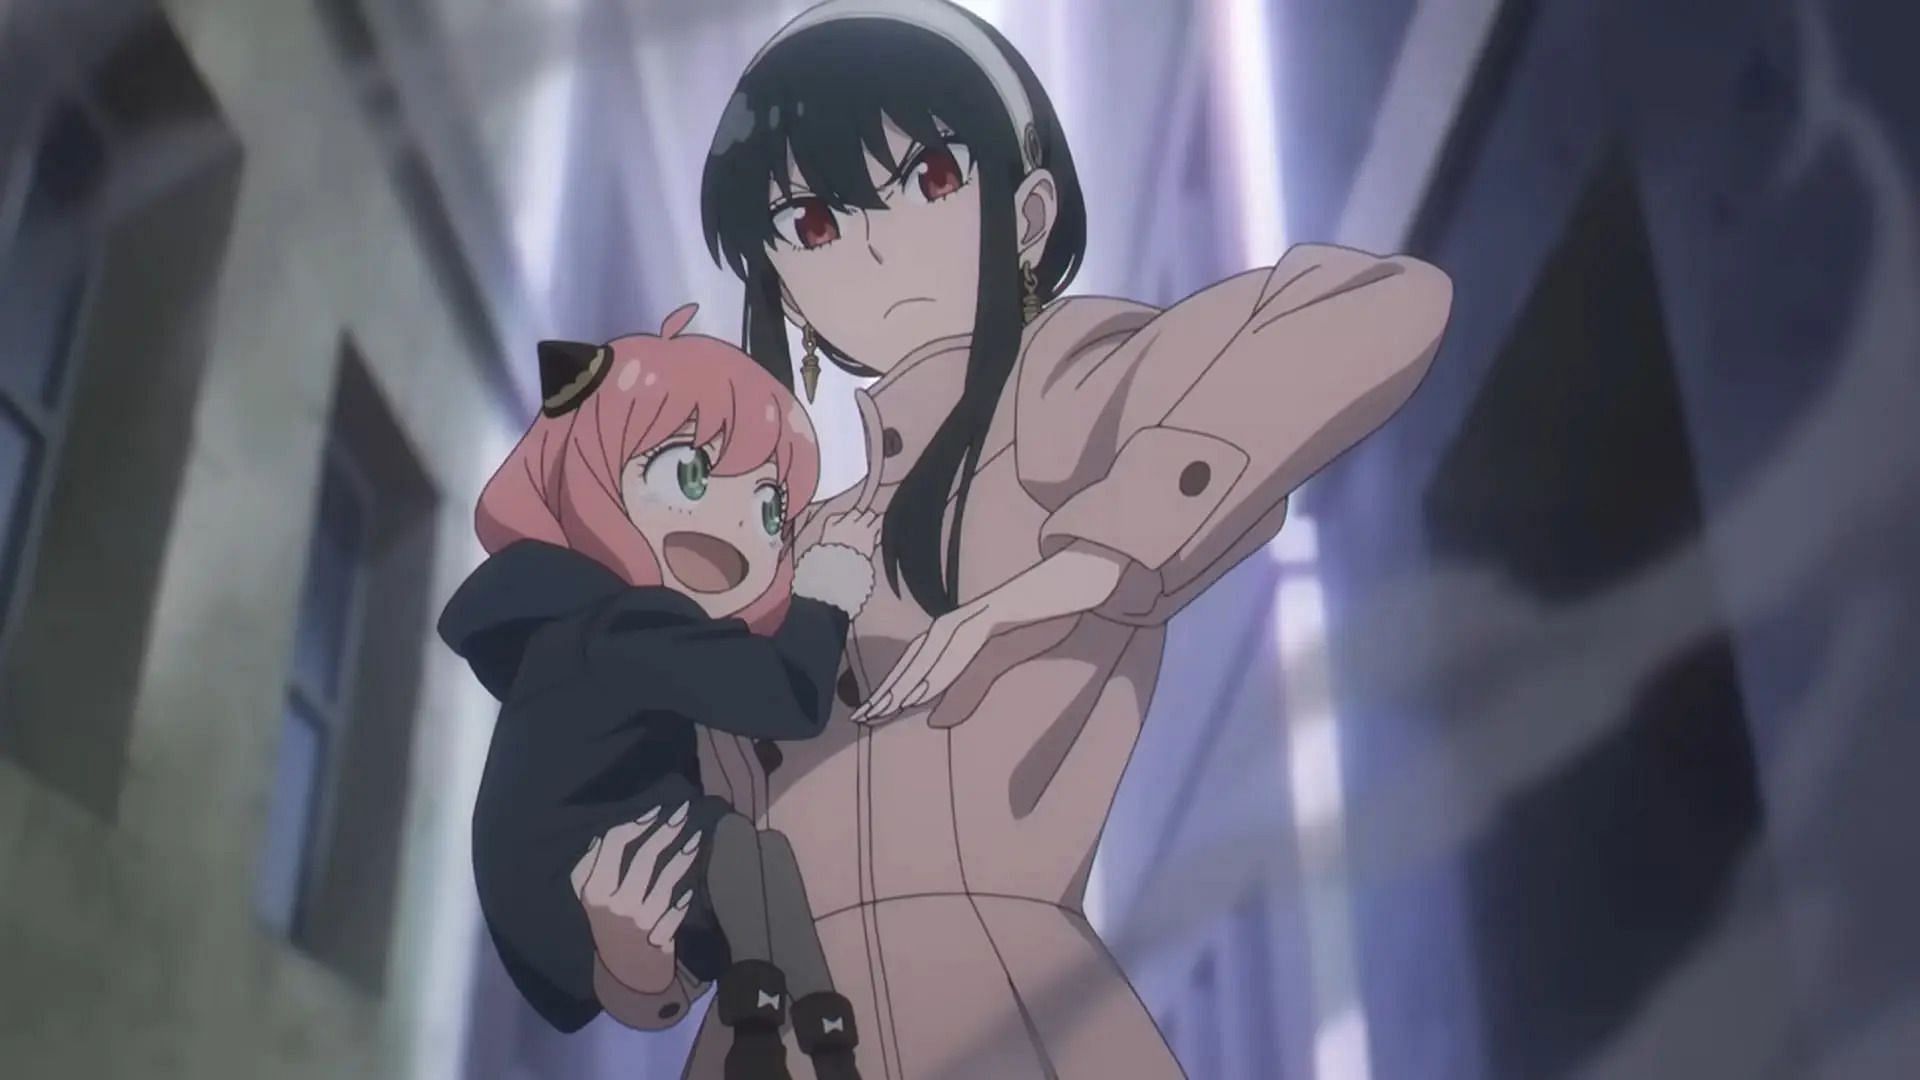 SPY x FAMILY Cour 2 Episode 14 Review - Best In Show - Crow's World of Anime